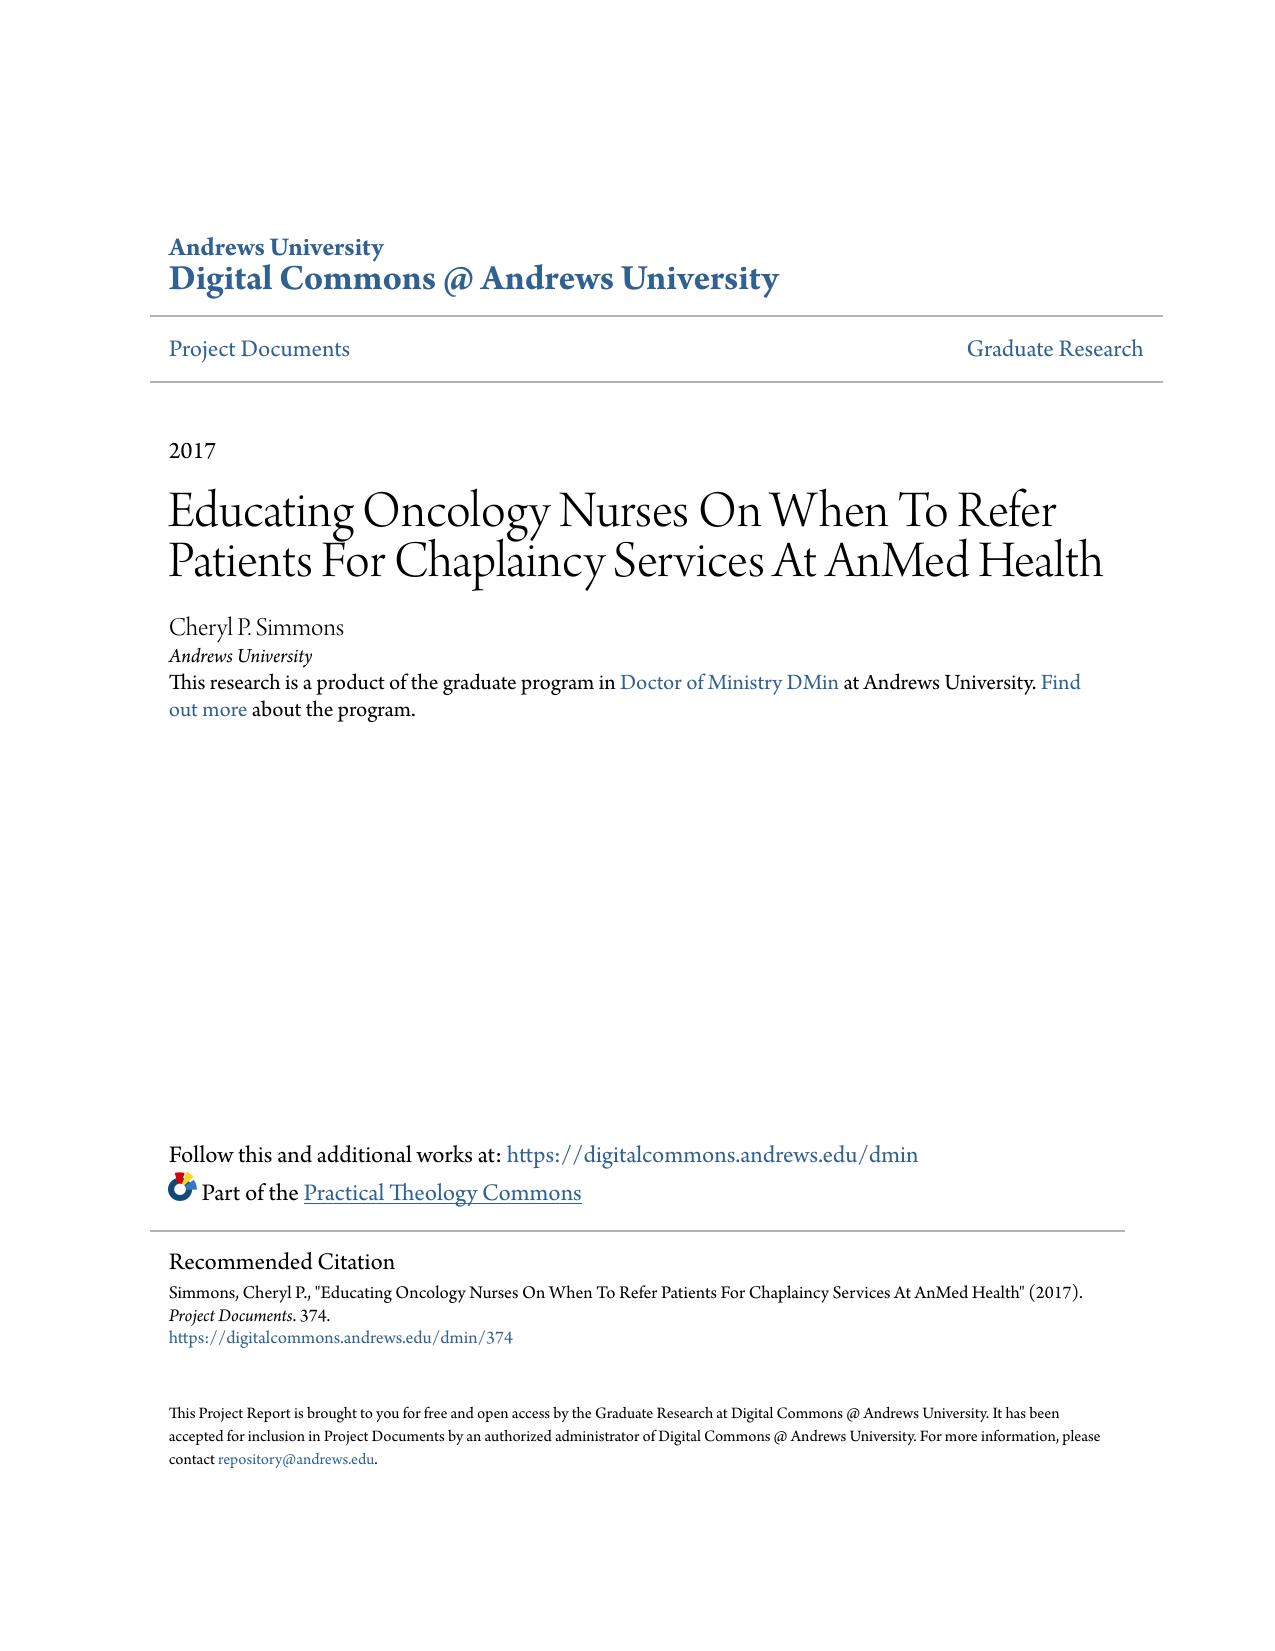 Educating Oncology Nurses On When To Refer Patients For Chaplaincy Services At AnMed Health